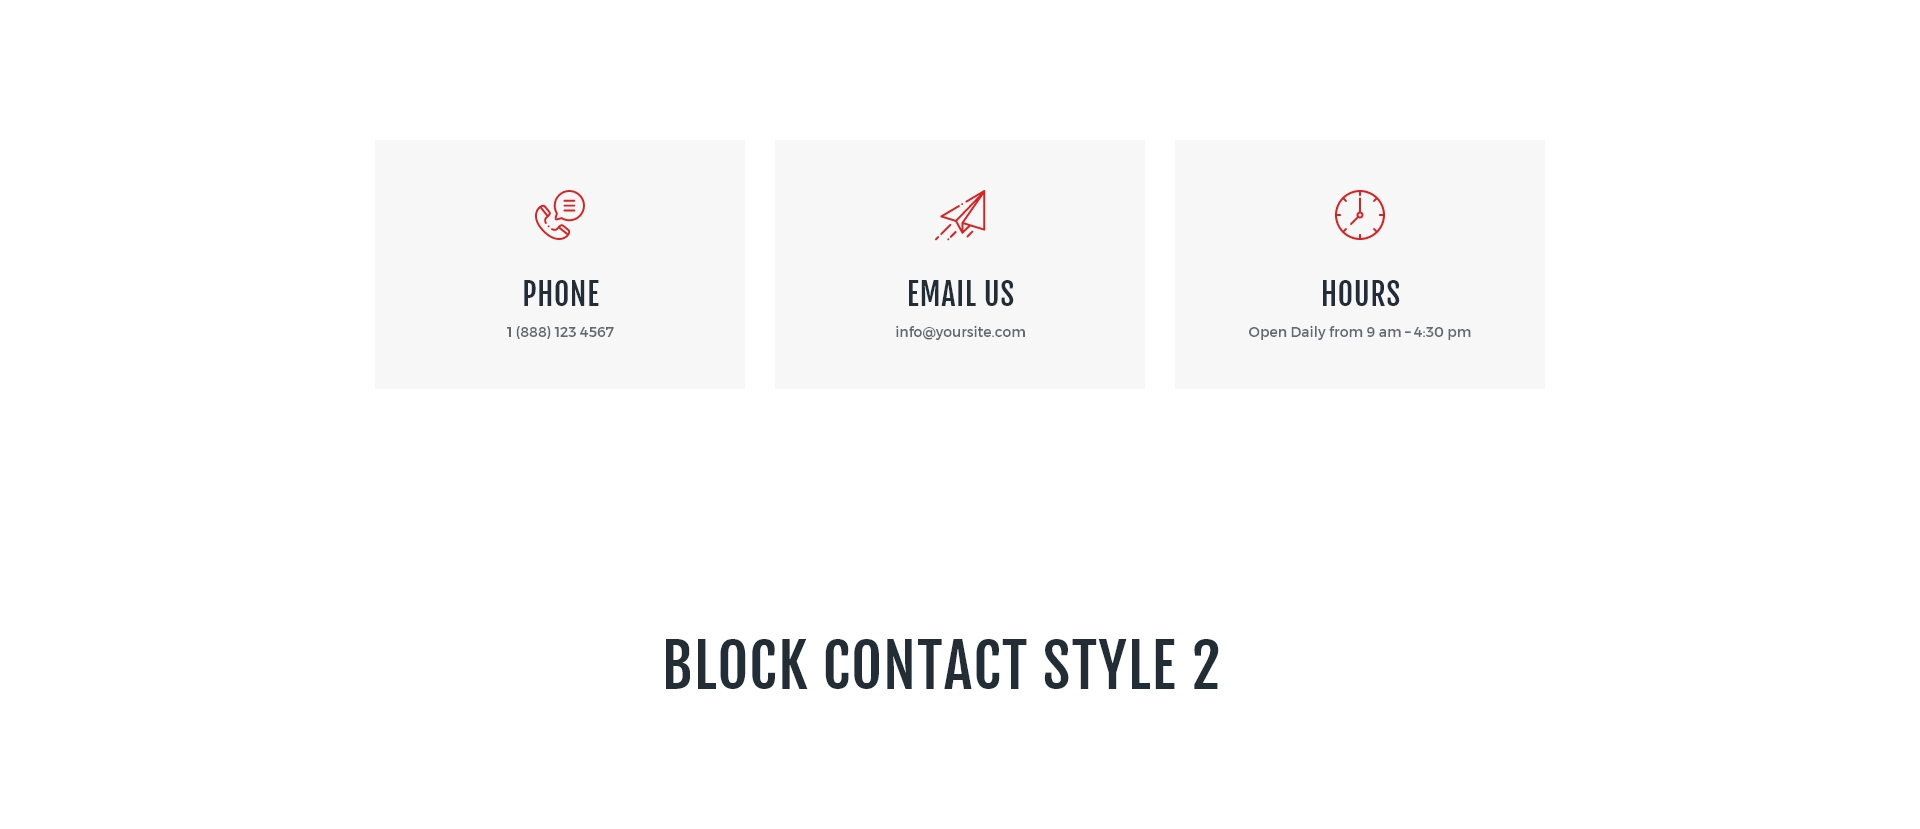 Block contact style 2